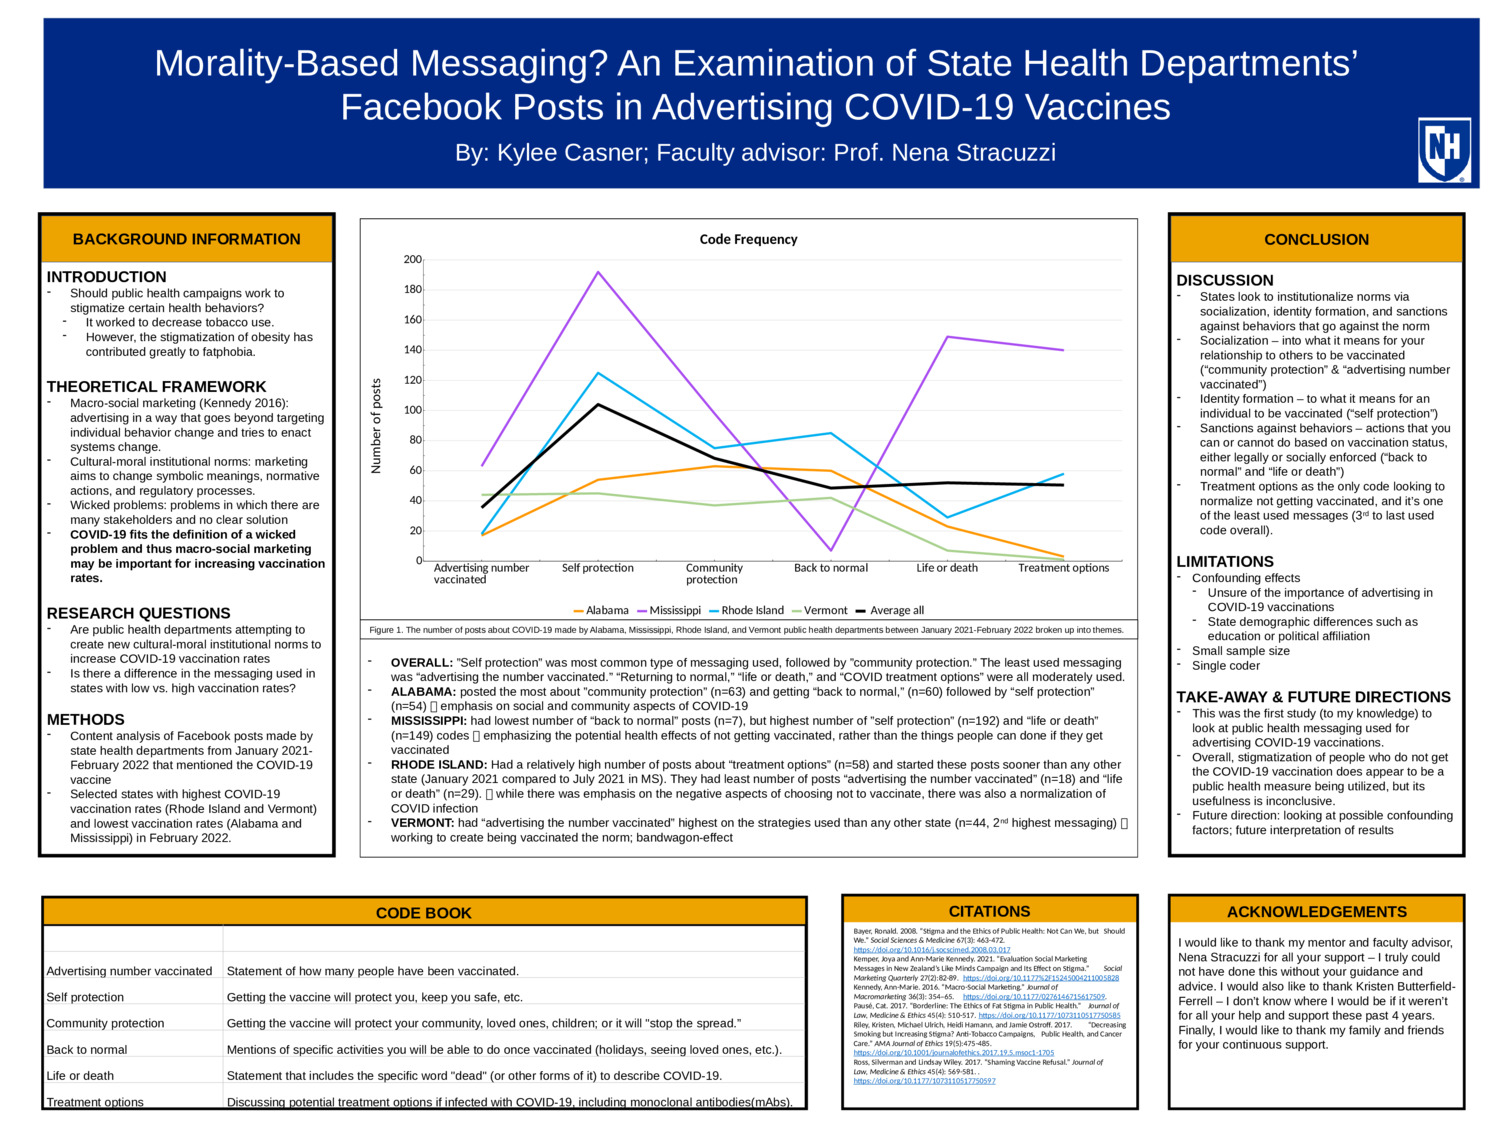 Morality-Based Messaging? An Examination Of State Health Departments' Facebook Posts In Advertising Covid-19 Vaccines by krc1040